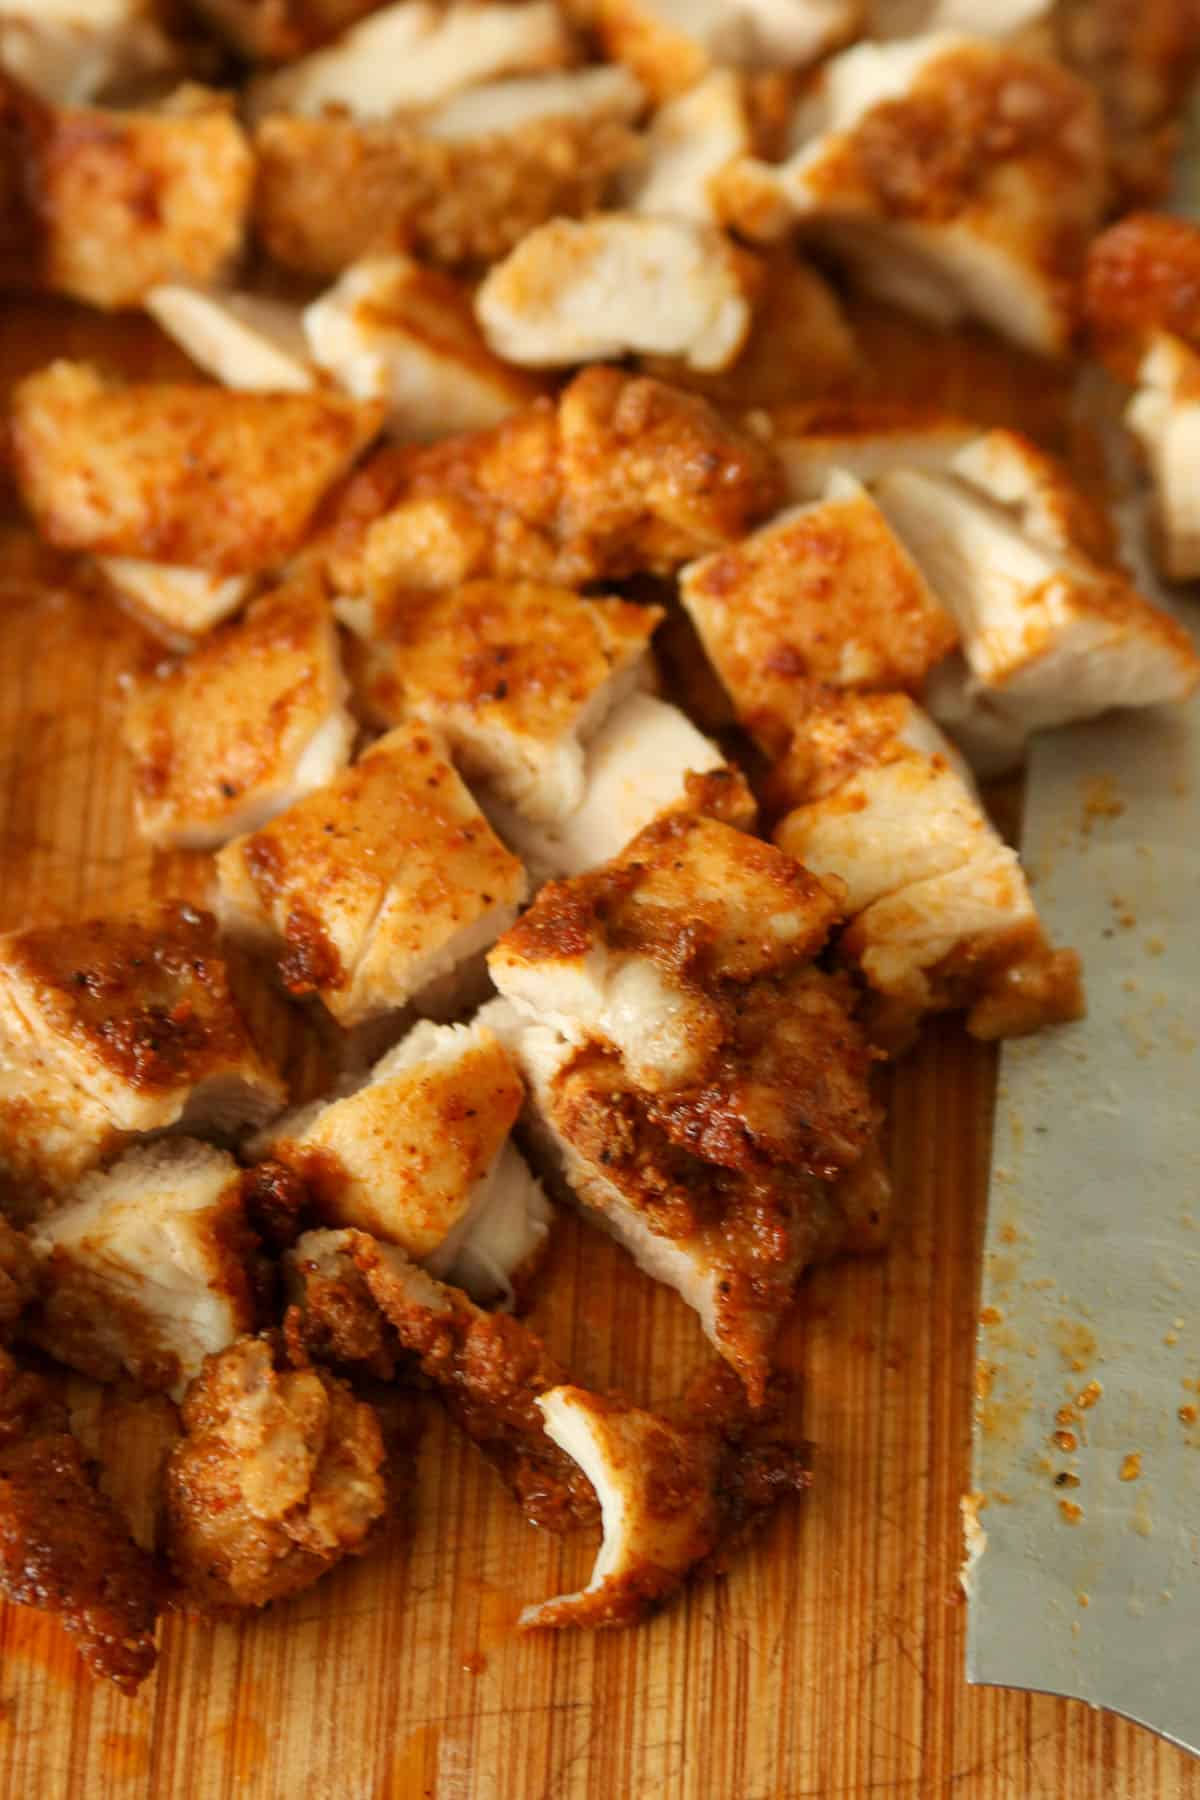 The chopped chicken pieces.